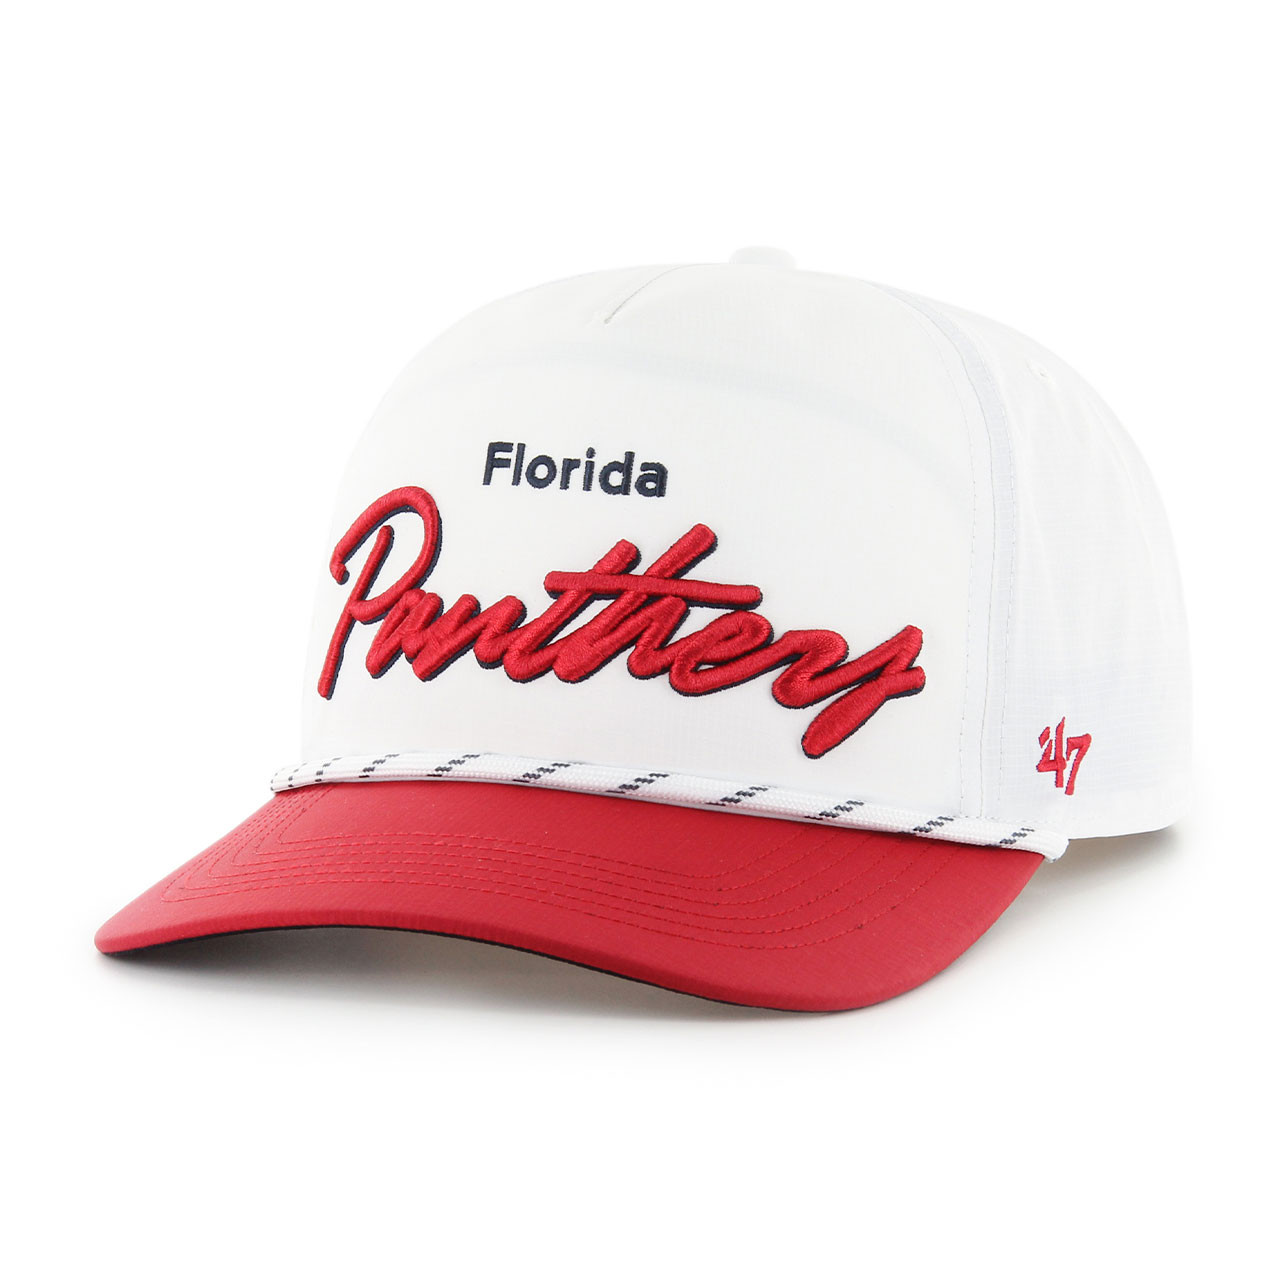 Florida Panthers Apparel, Collectibles, and Fan Gear. FOCO